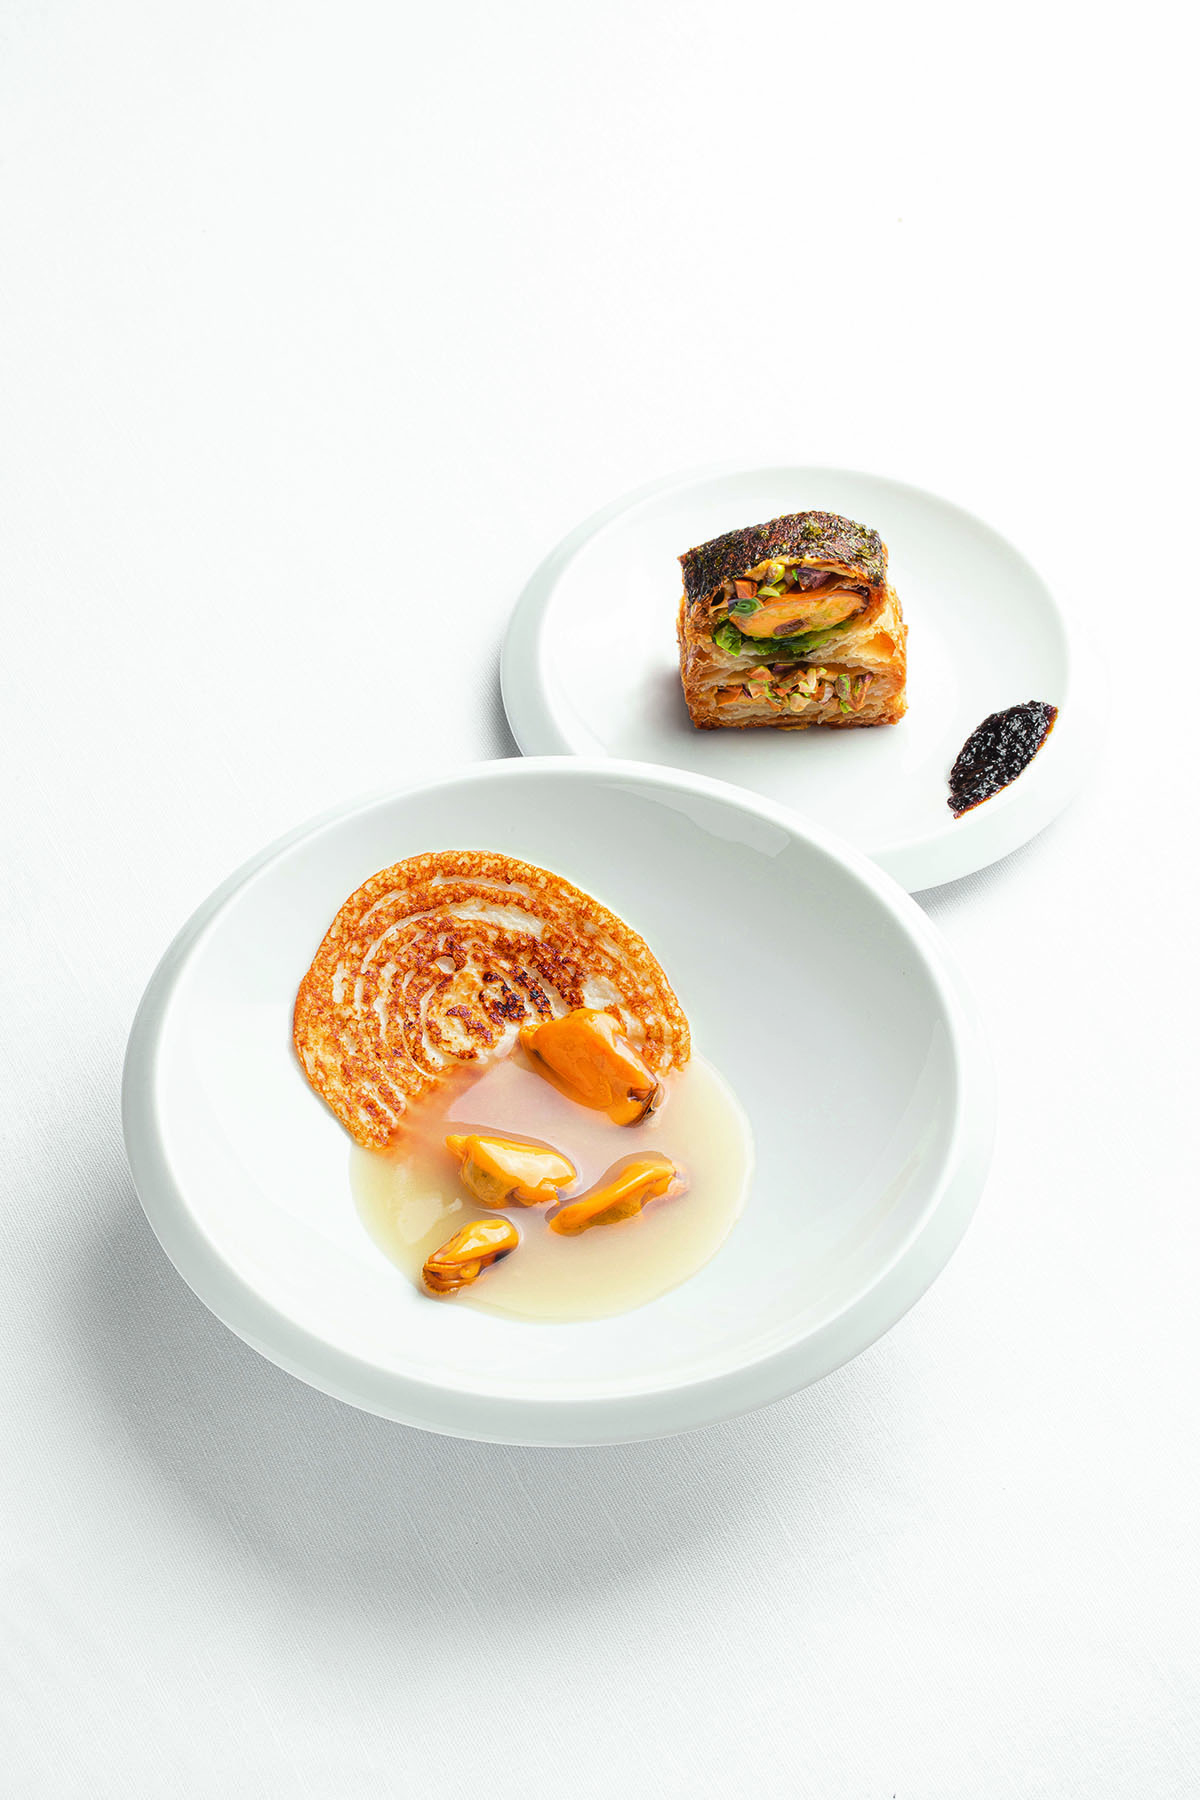 pastry style dishes on separate plates